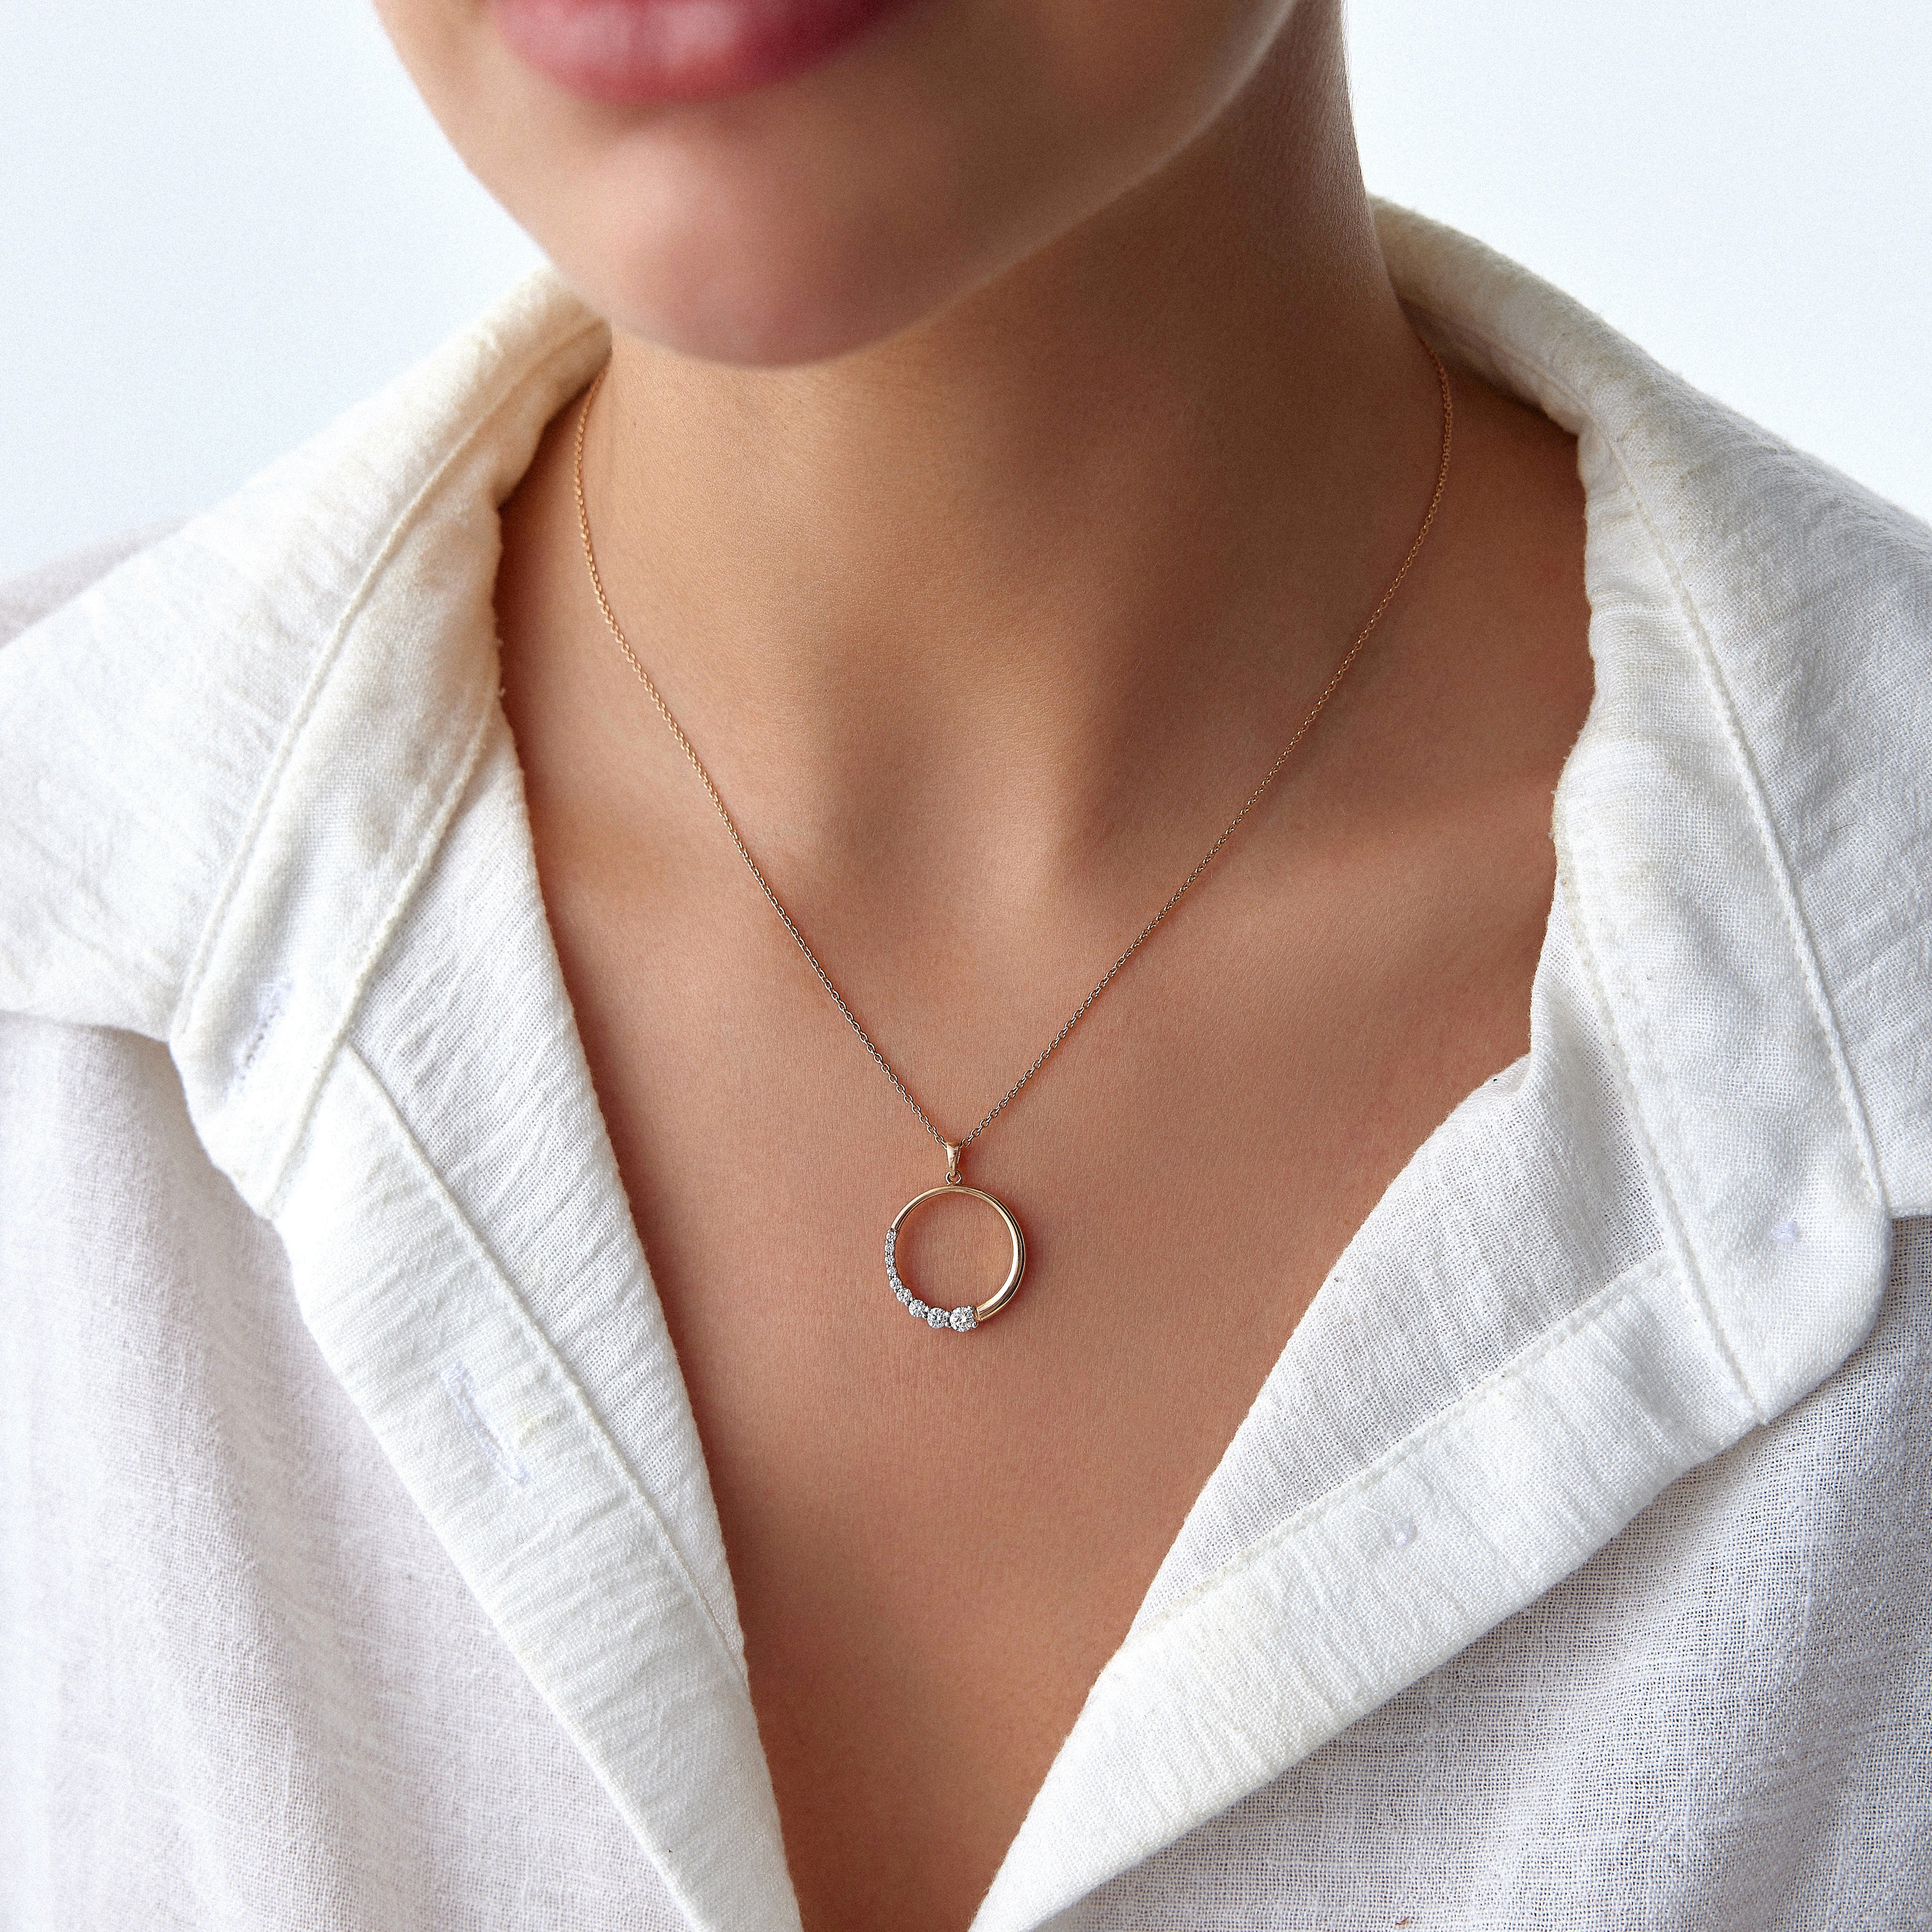 Graduated Diamond Necklace Available in 14K and 18K Gold